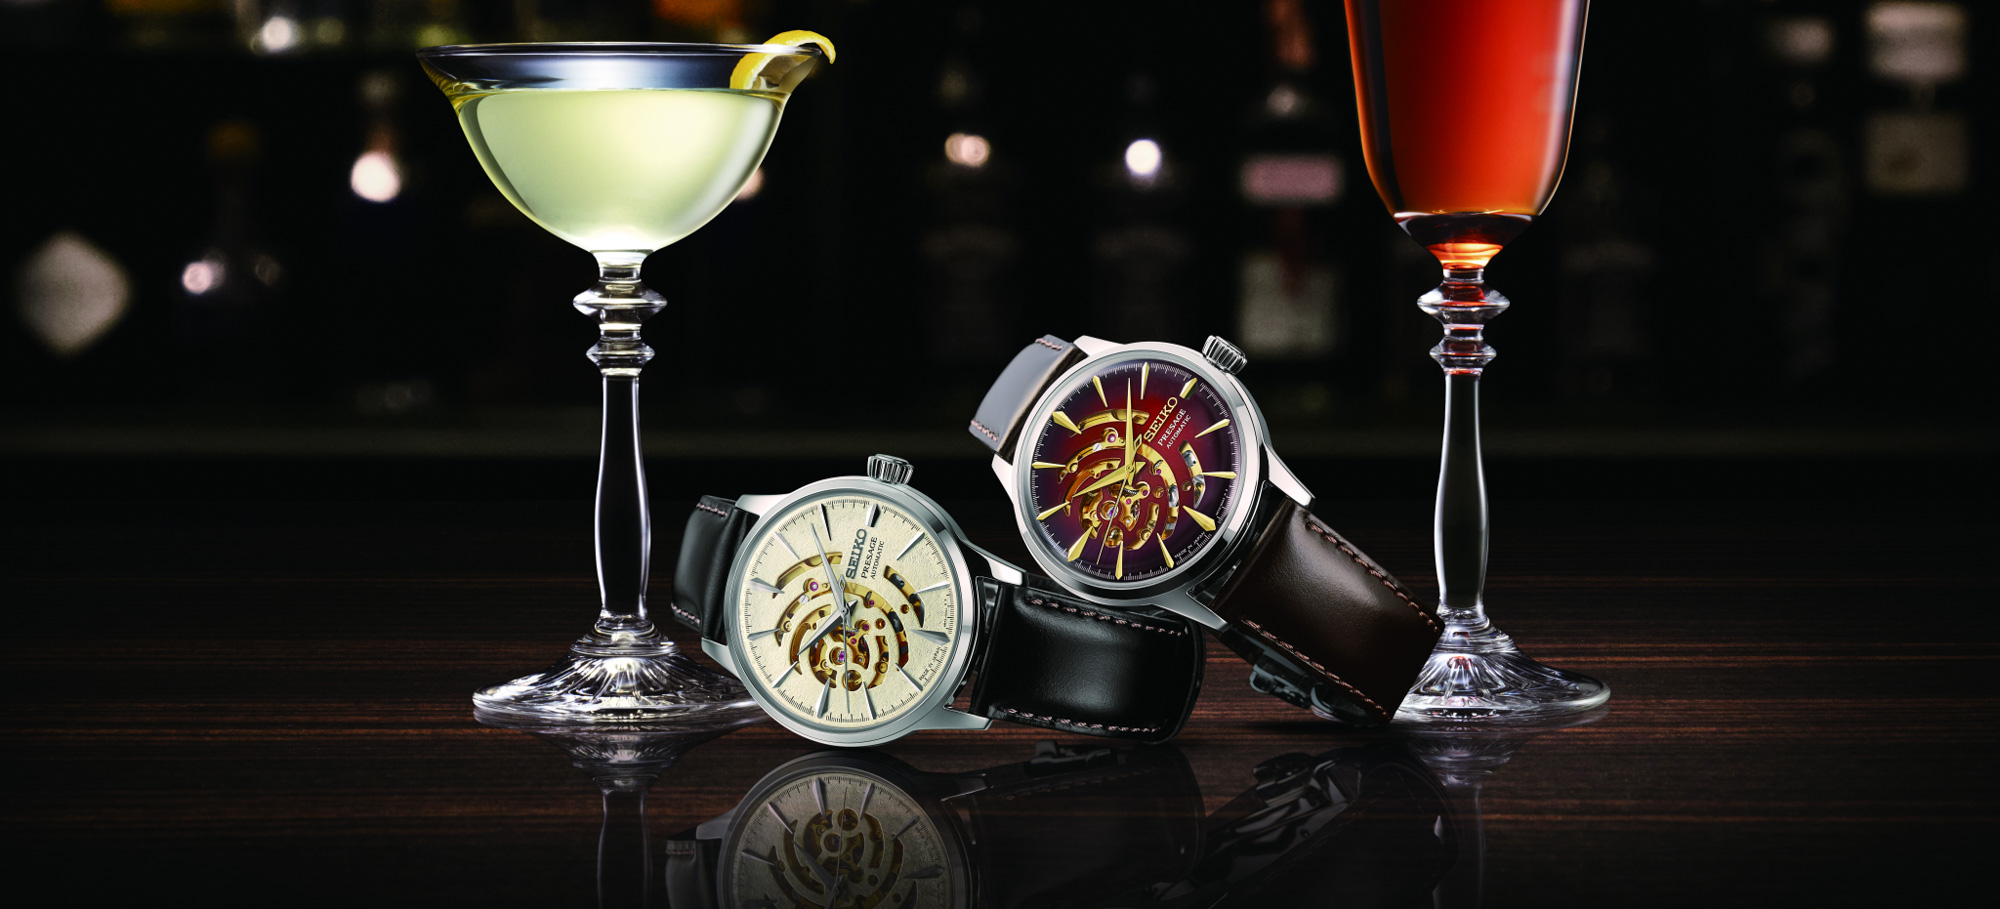 Seiko Unveils New Presage Cocktail Time STAR BAR Limited-Edition Watches |  aBlogtoWatch